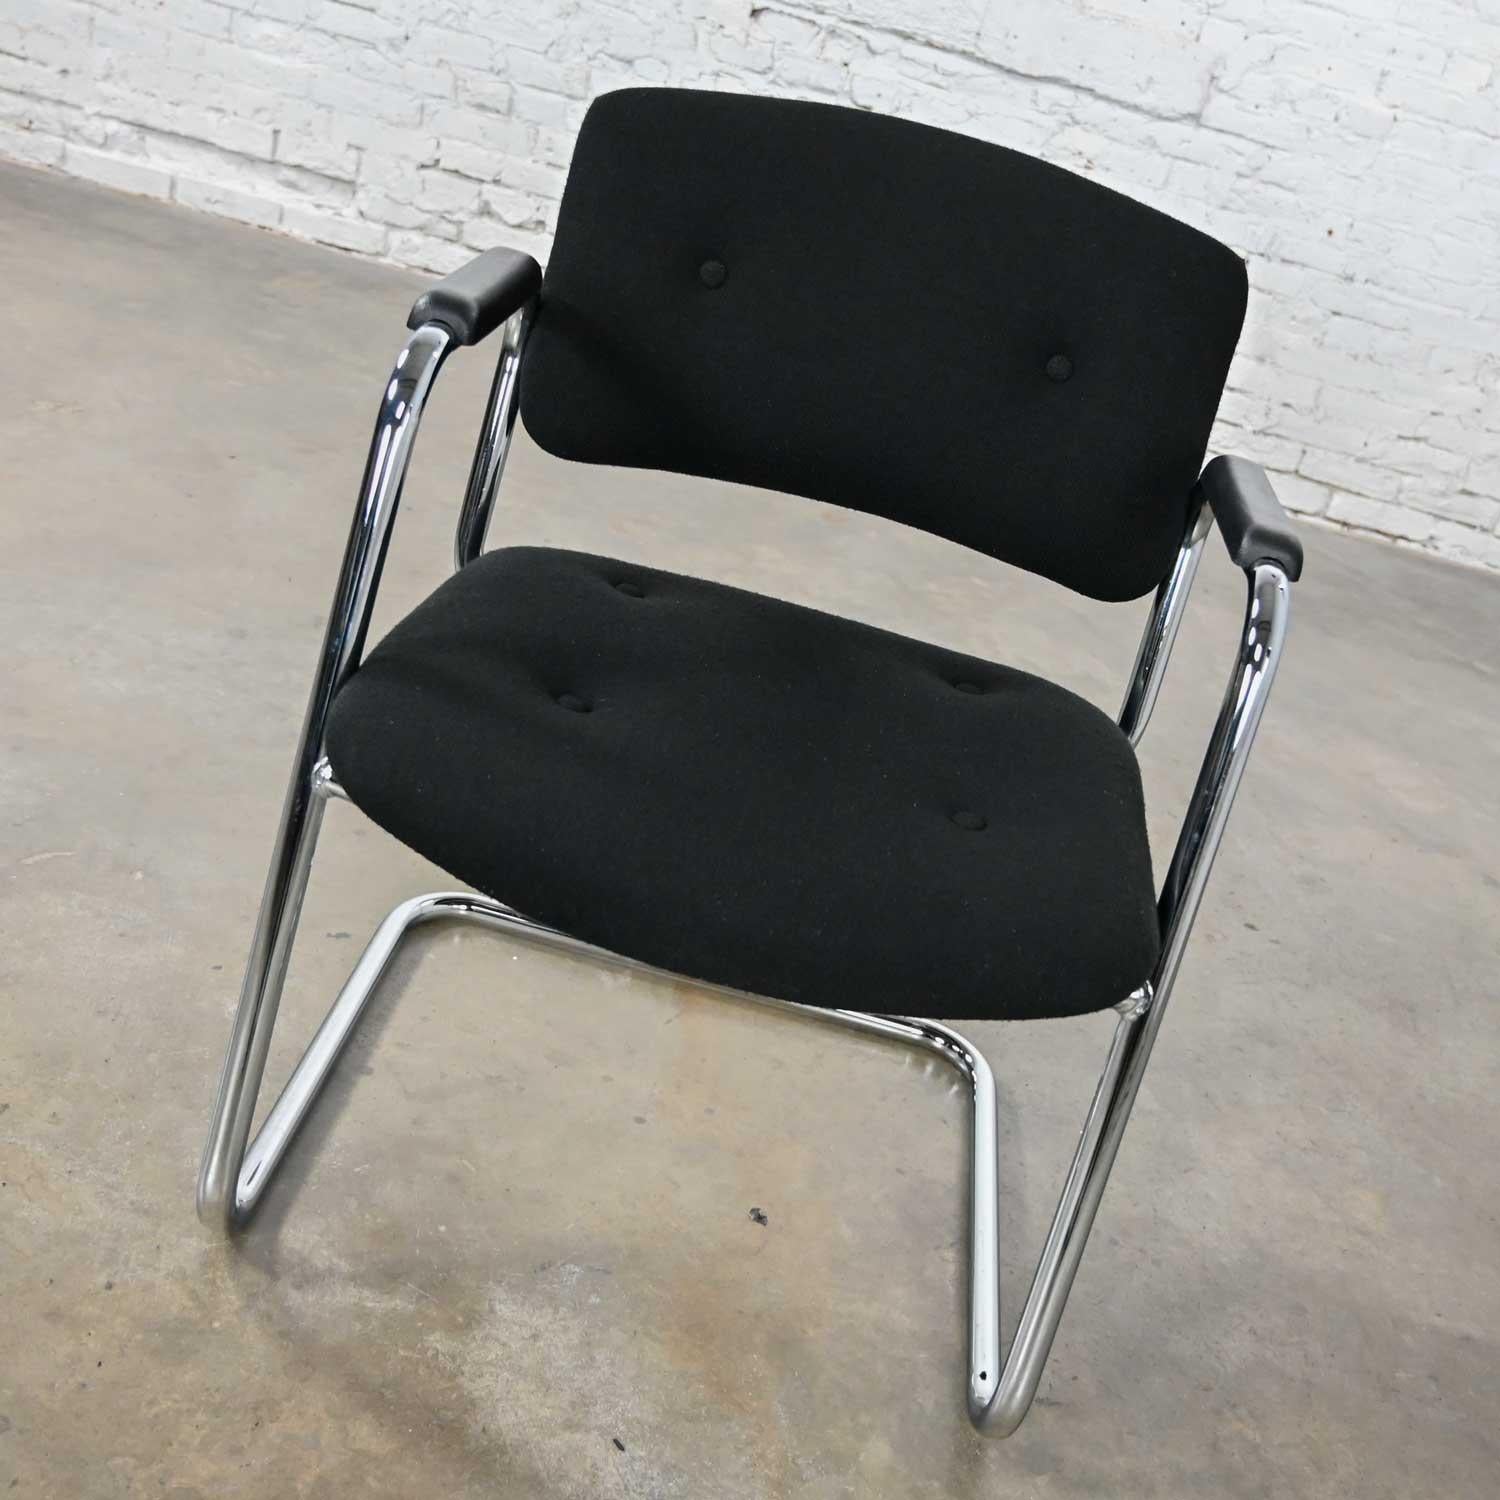 Vintage Modern Black & Chrome Cantilever Chair by United Chair Co Style of Steel In Good Condition For Sale In Topeka, KS